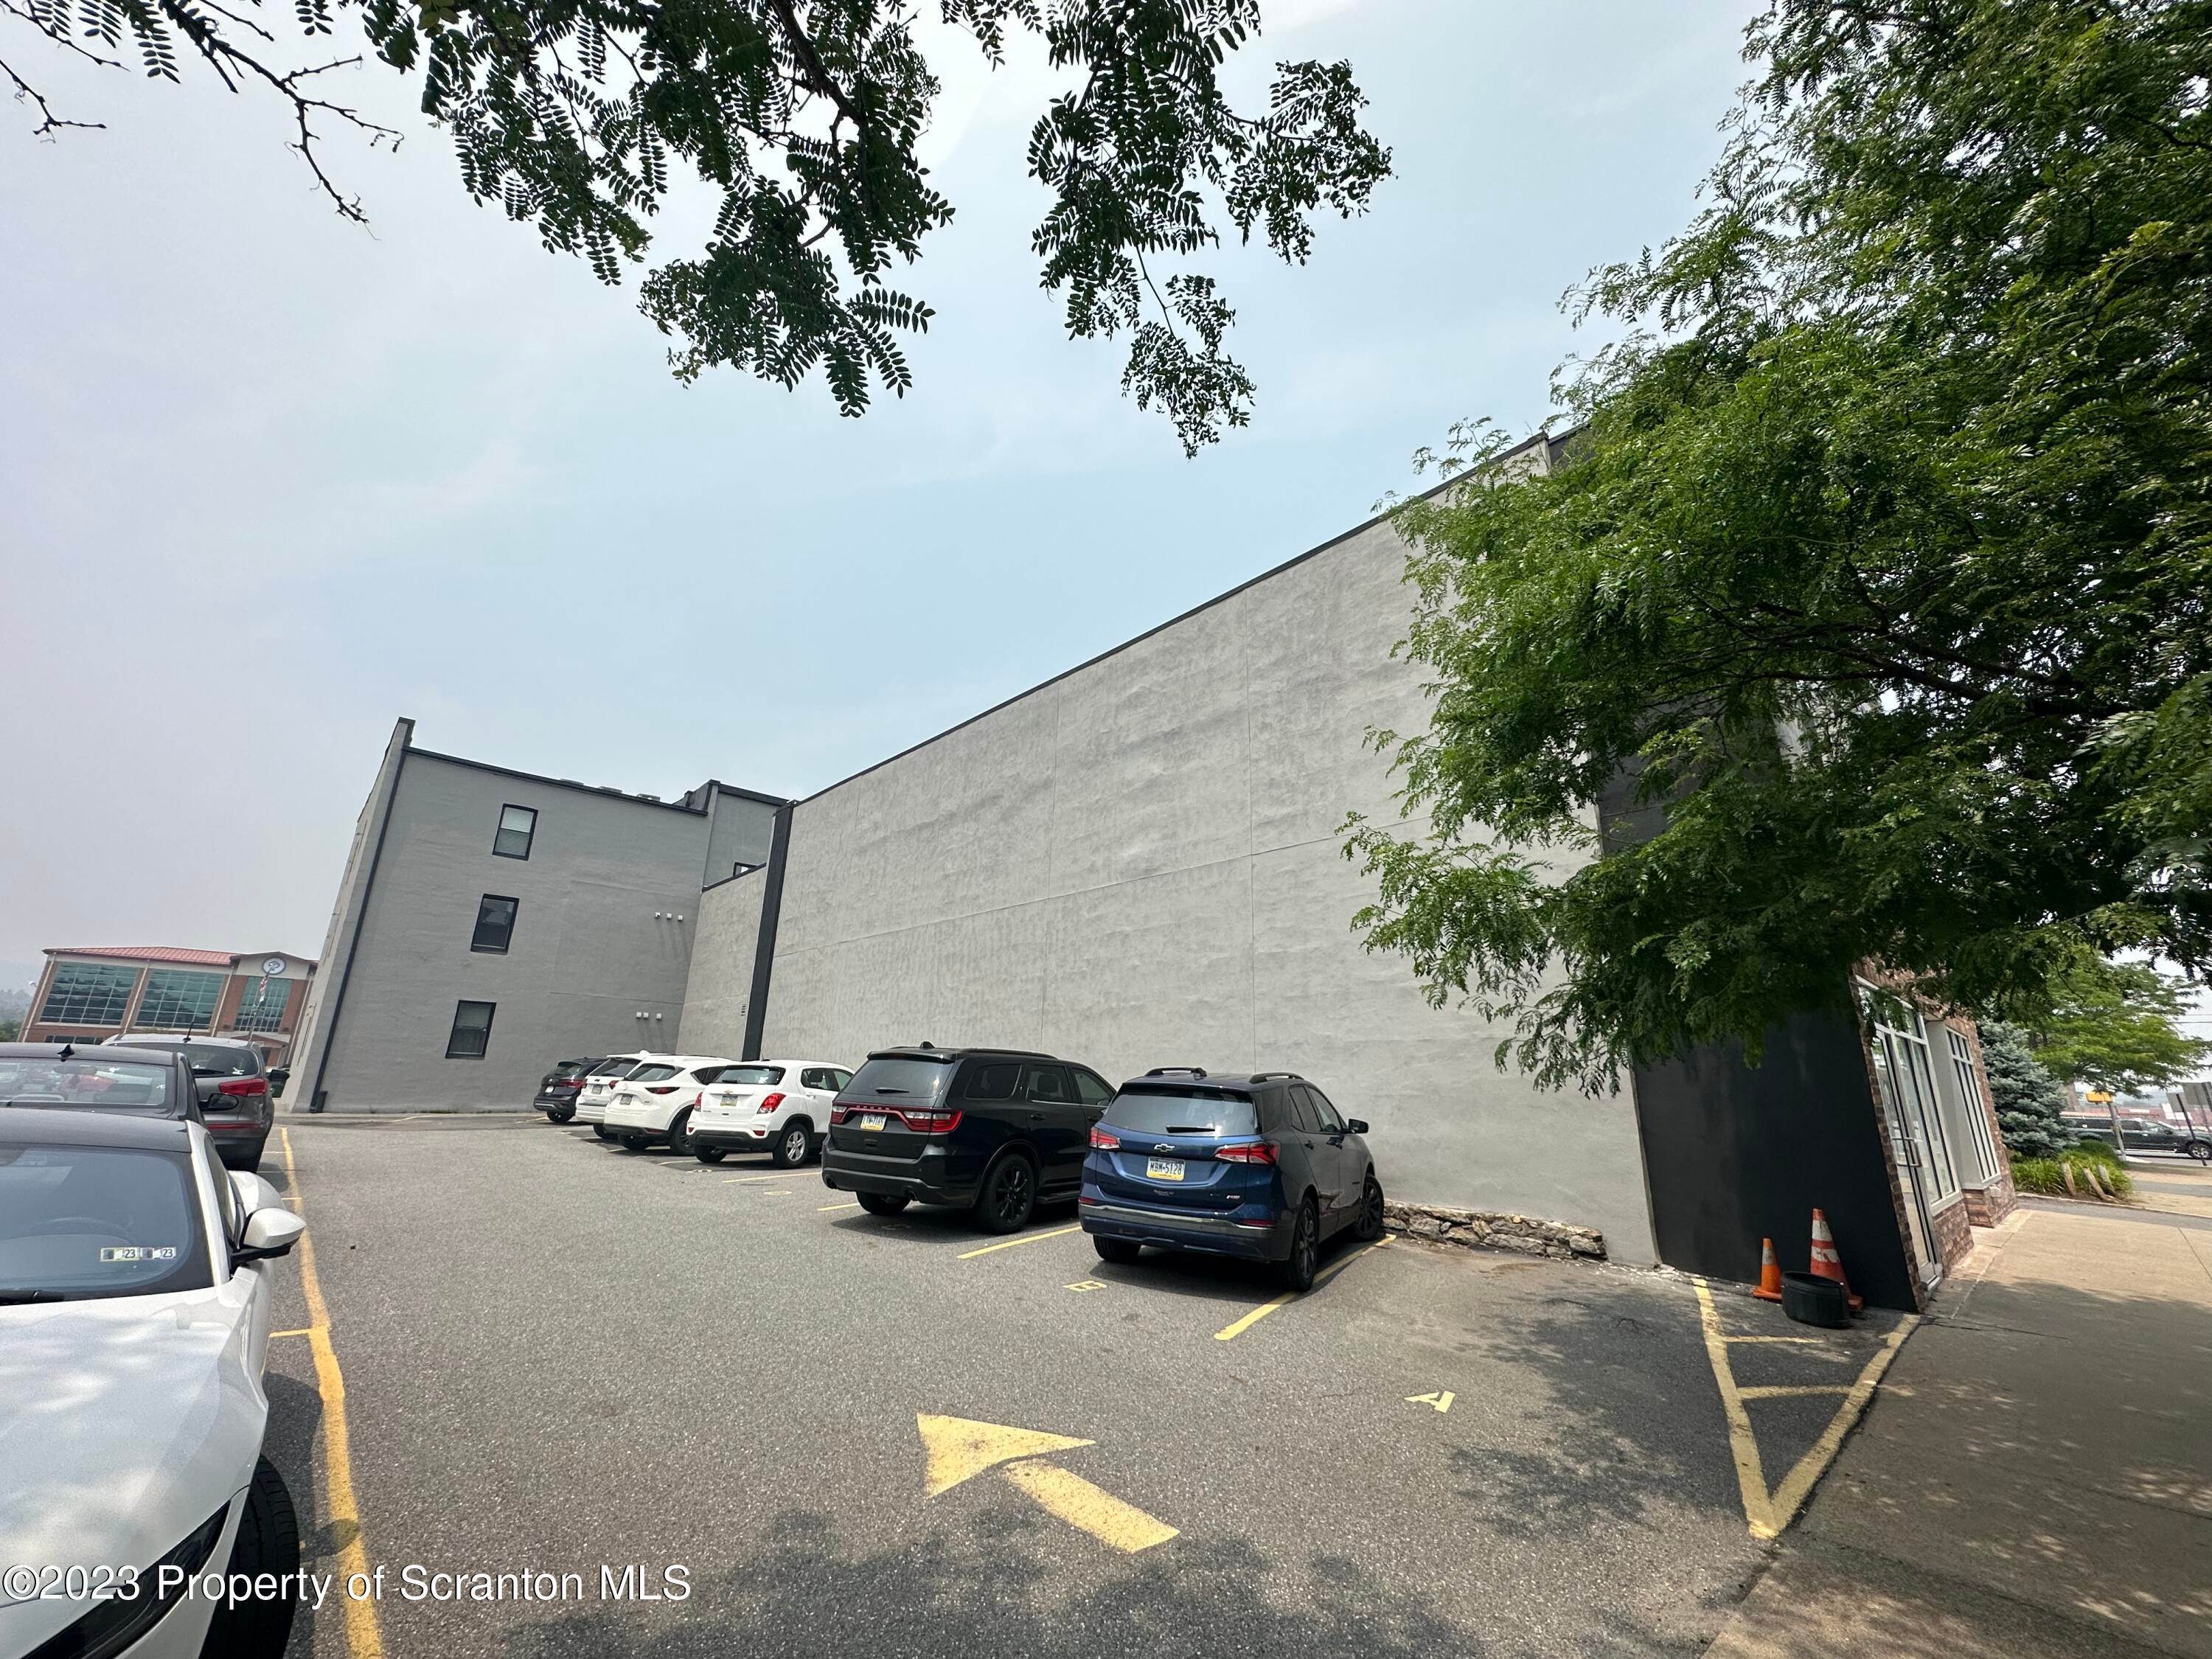 5. Commercial for Sale at 329 331 Penn Ave Scranton, Pennsylvania 18503 United States